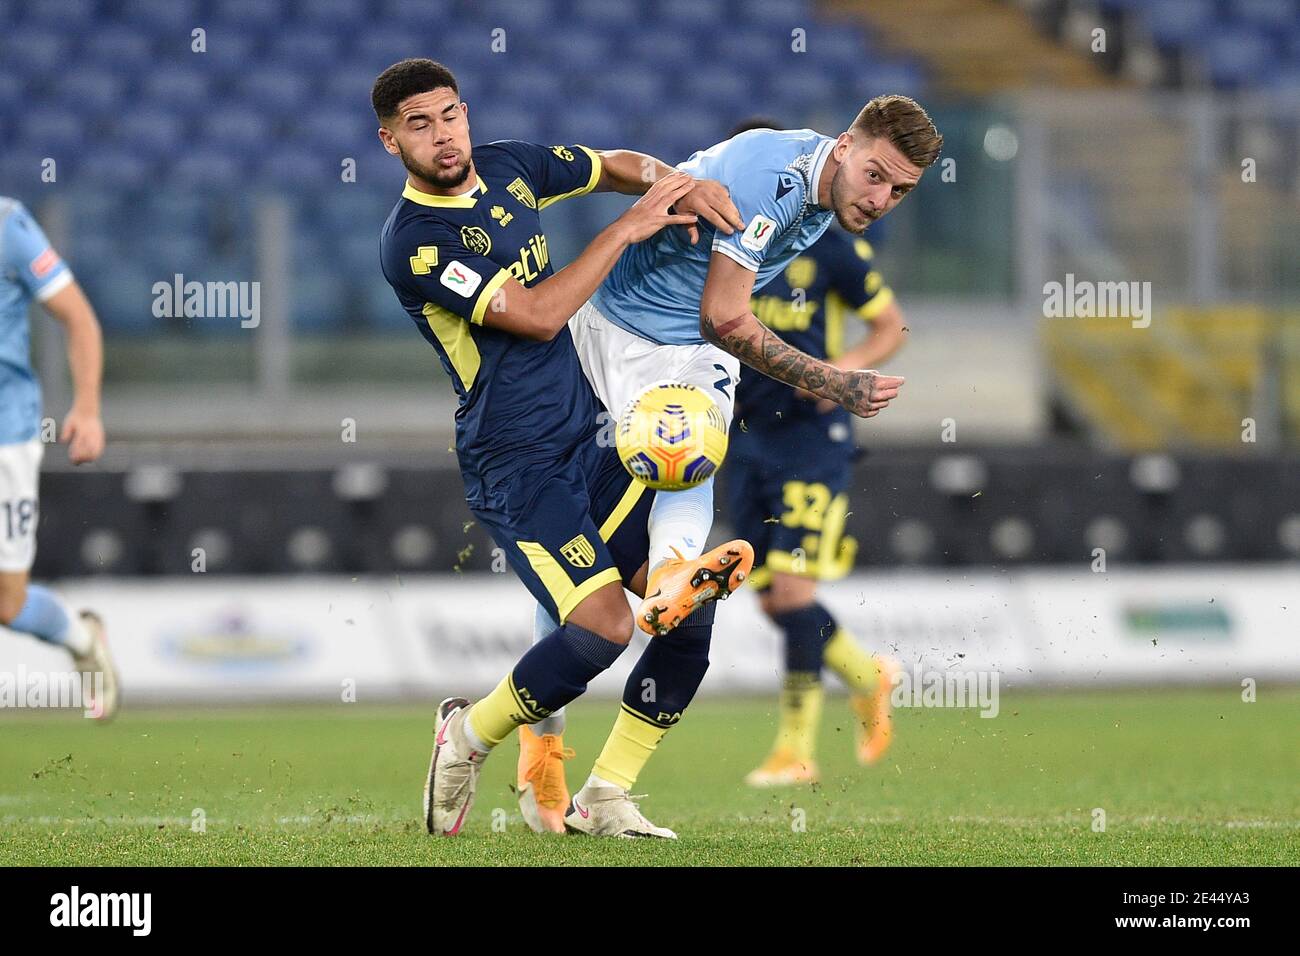 Rome, Italy. 21st Jan, 2021. ROME, ITALY - January 21 : Simon Salomon Sohm  (L) of Parma in action against Serjei Milinkovic (R) of SS Lazio during the  eighths TIM Cup soccer